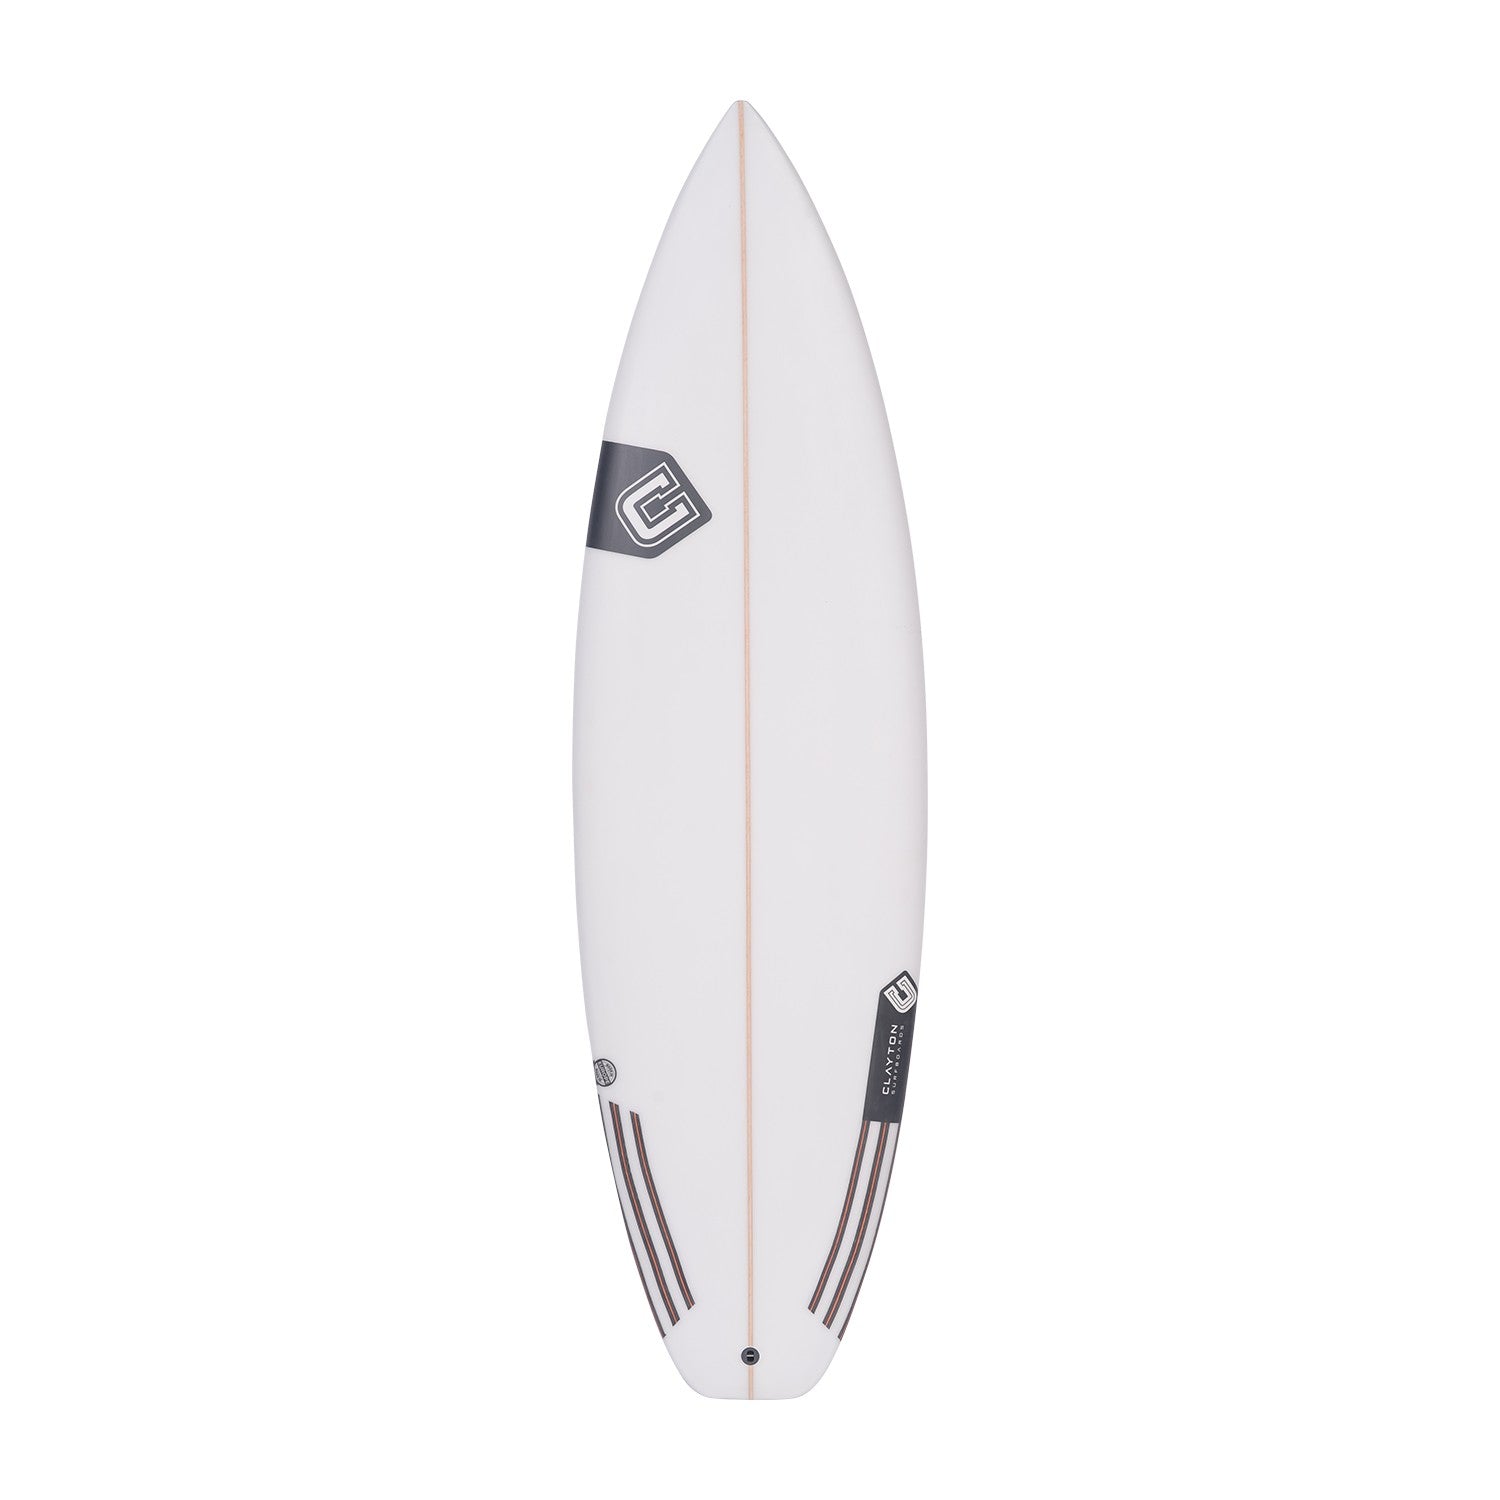 CLAYTON Surfboards - Trickster (PU) Futures - 5'10